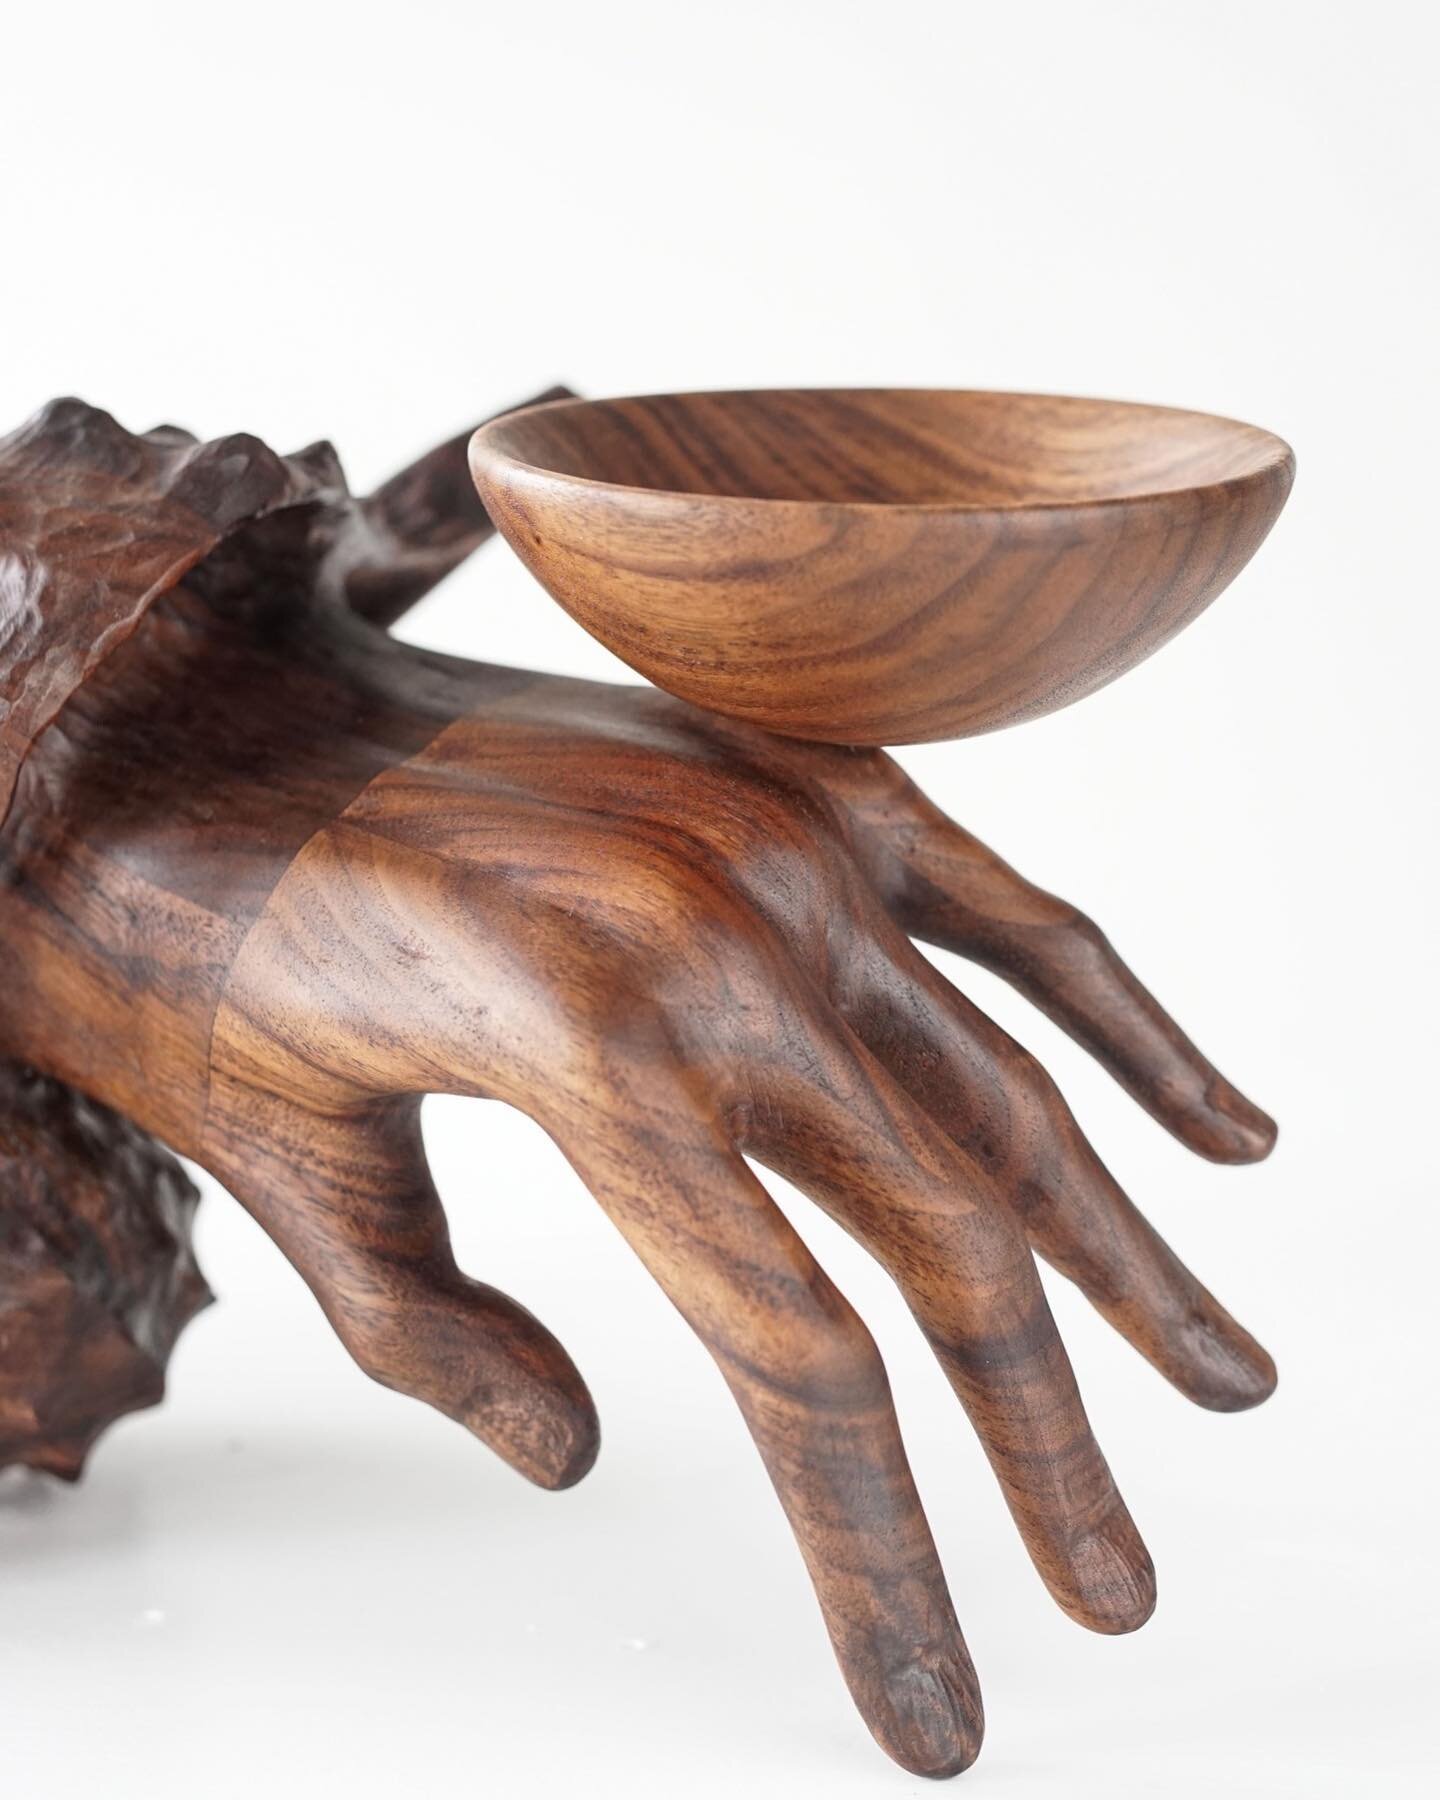 Vincent Pocsik creates a strange and delicate vision from carved black walnut. Emerging from a conch shell, a slender hand precariously balances a small bowl. Pocsik's work plays with functionality, humor, and the surreal. You can view it in person a